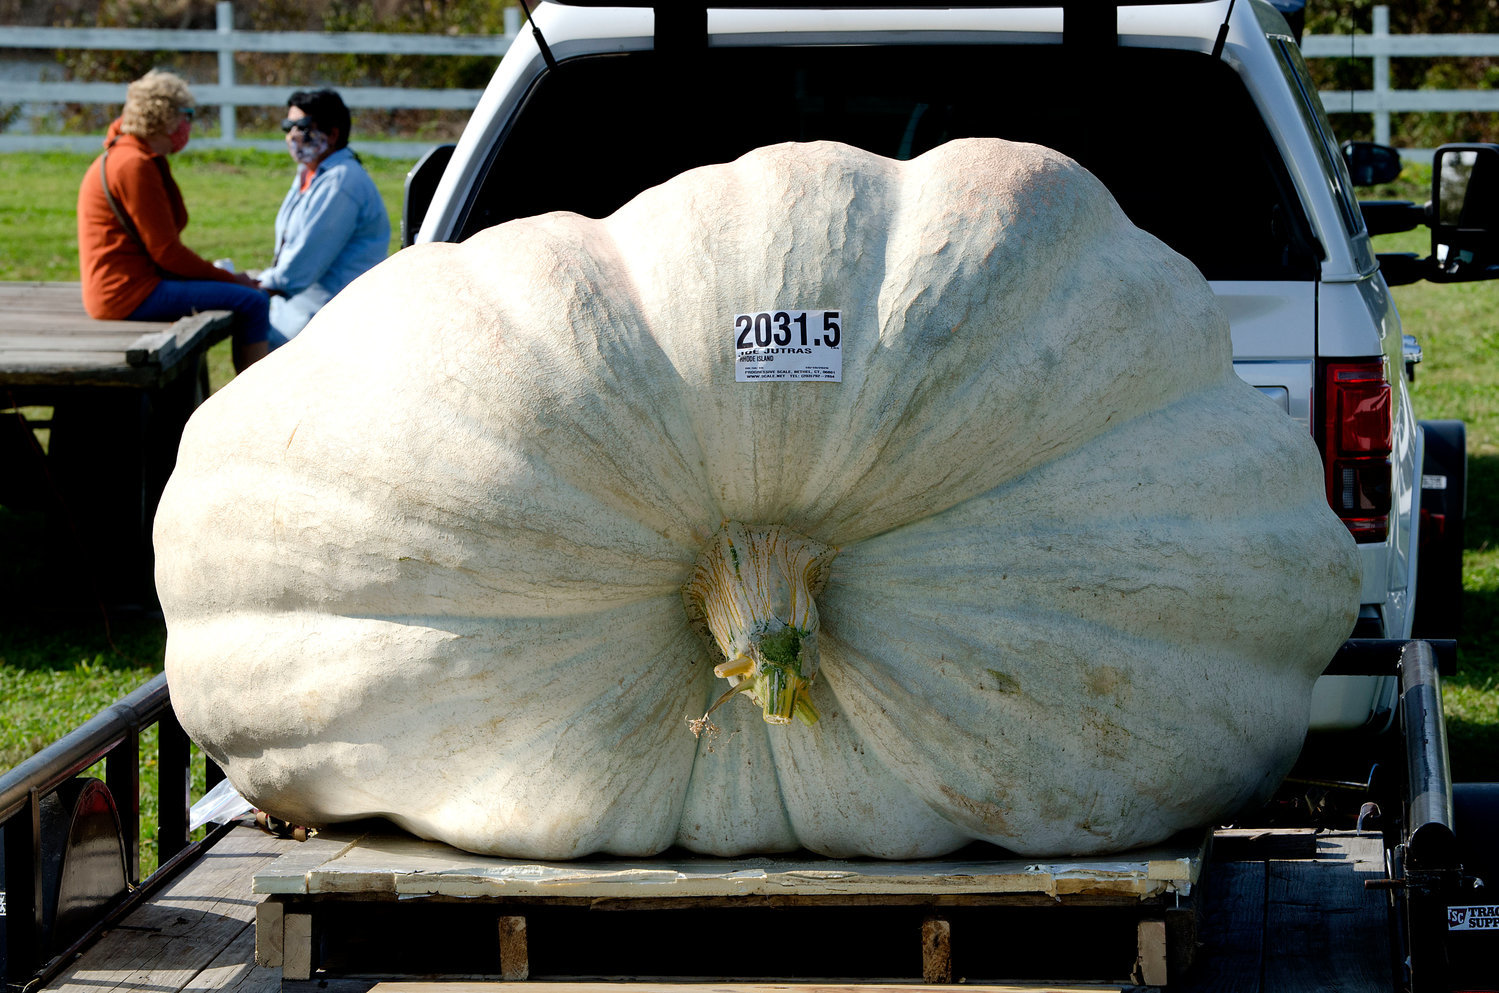 From last year’s weigh-off — Rhode Island grower Joe Jutras's entry weighed 2,031.5 pounds.